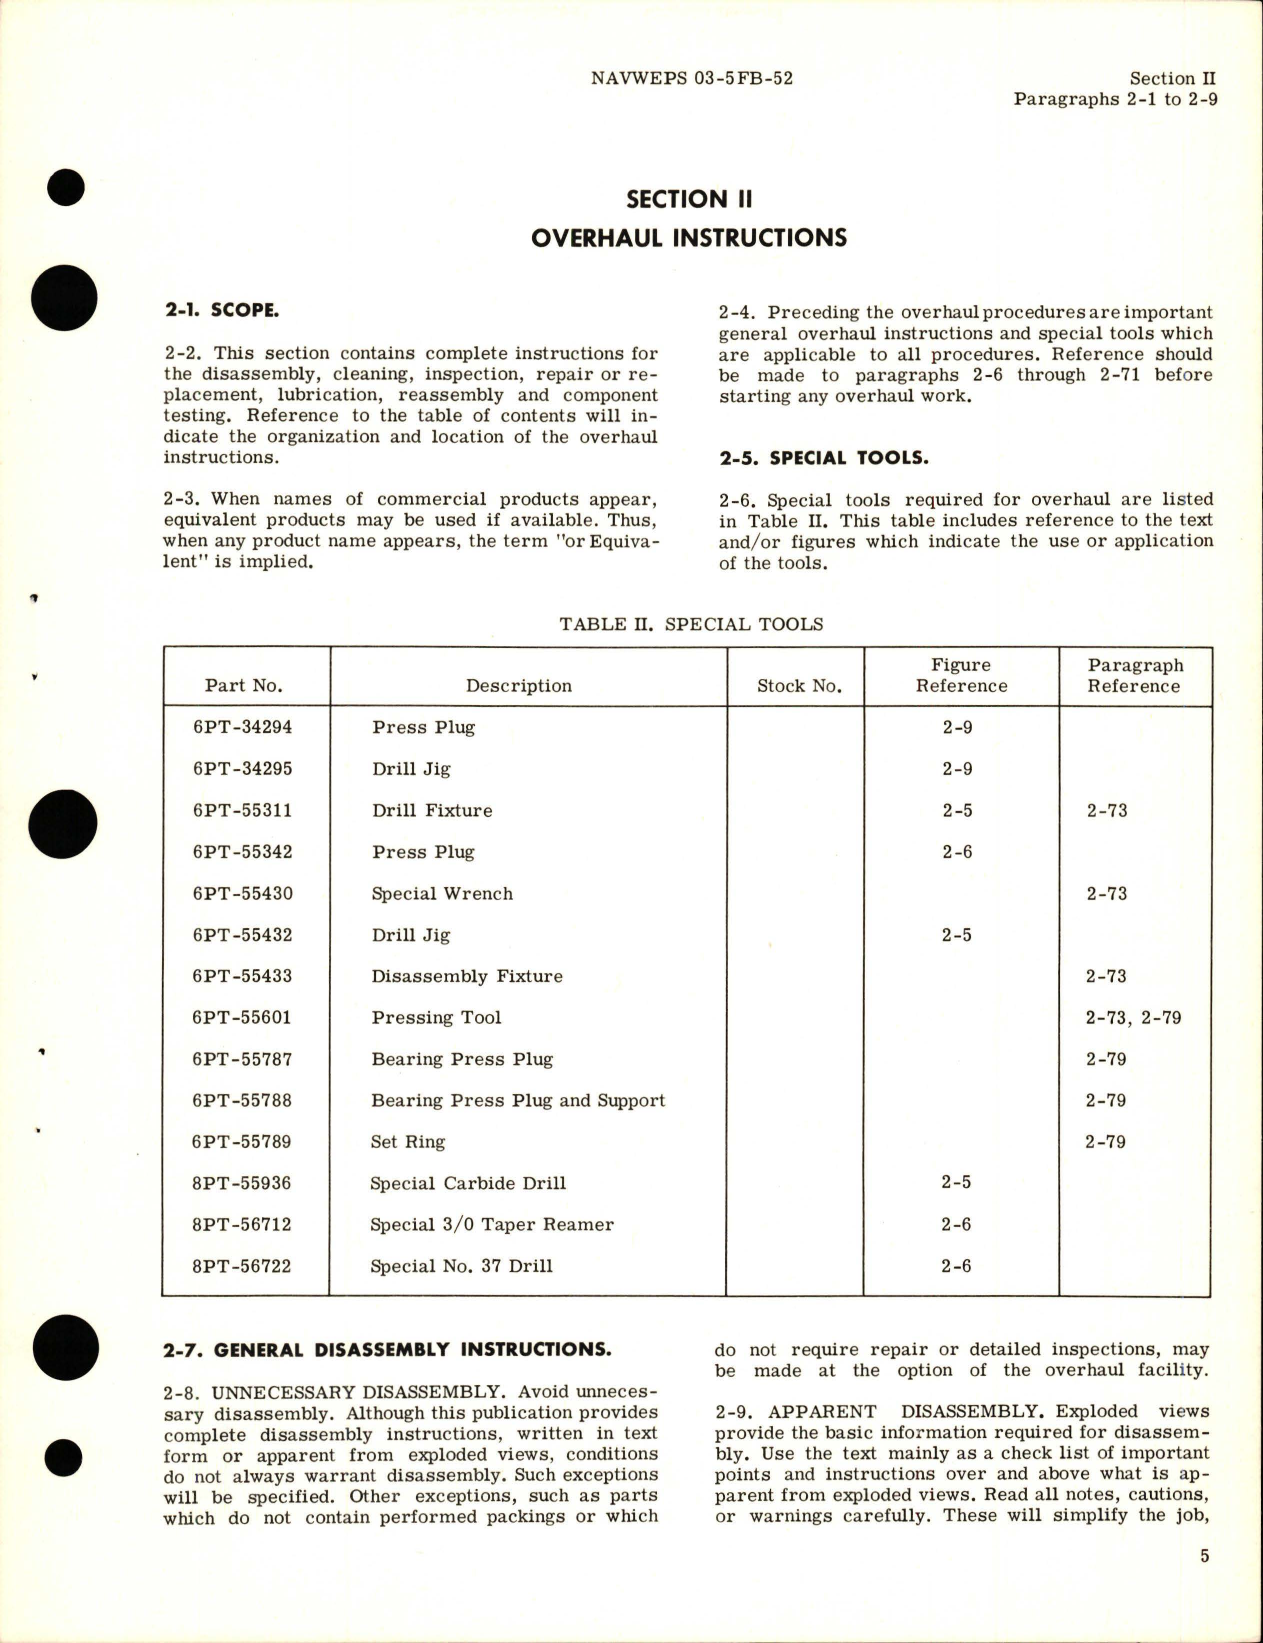 Sample page 9 from AirCorps Library document: Overhaul Instructions for Torque Limiter & Disconnect - Part 683266-2